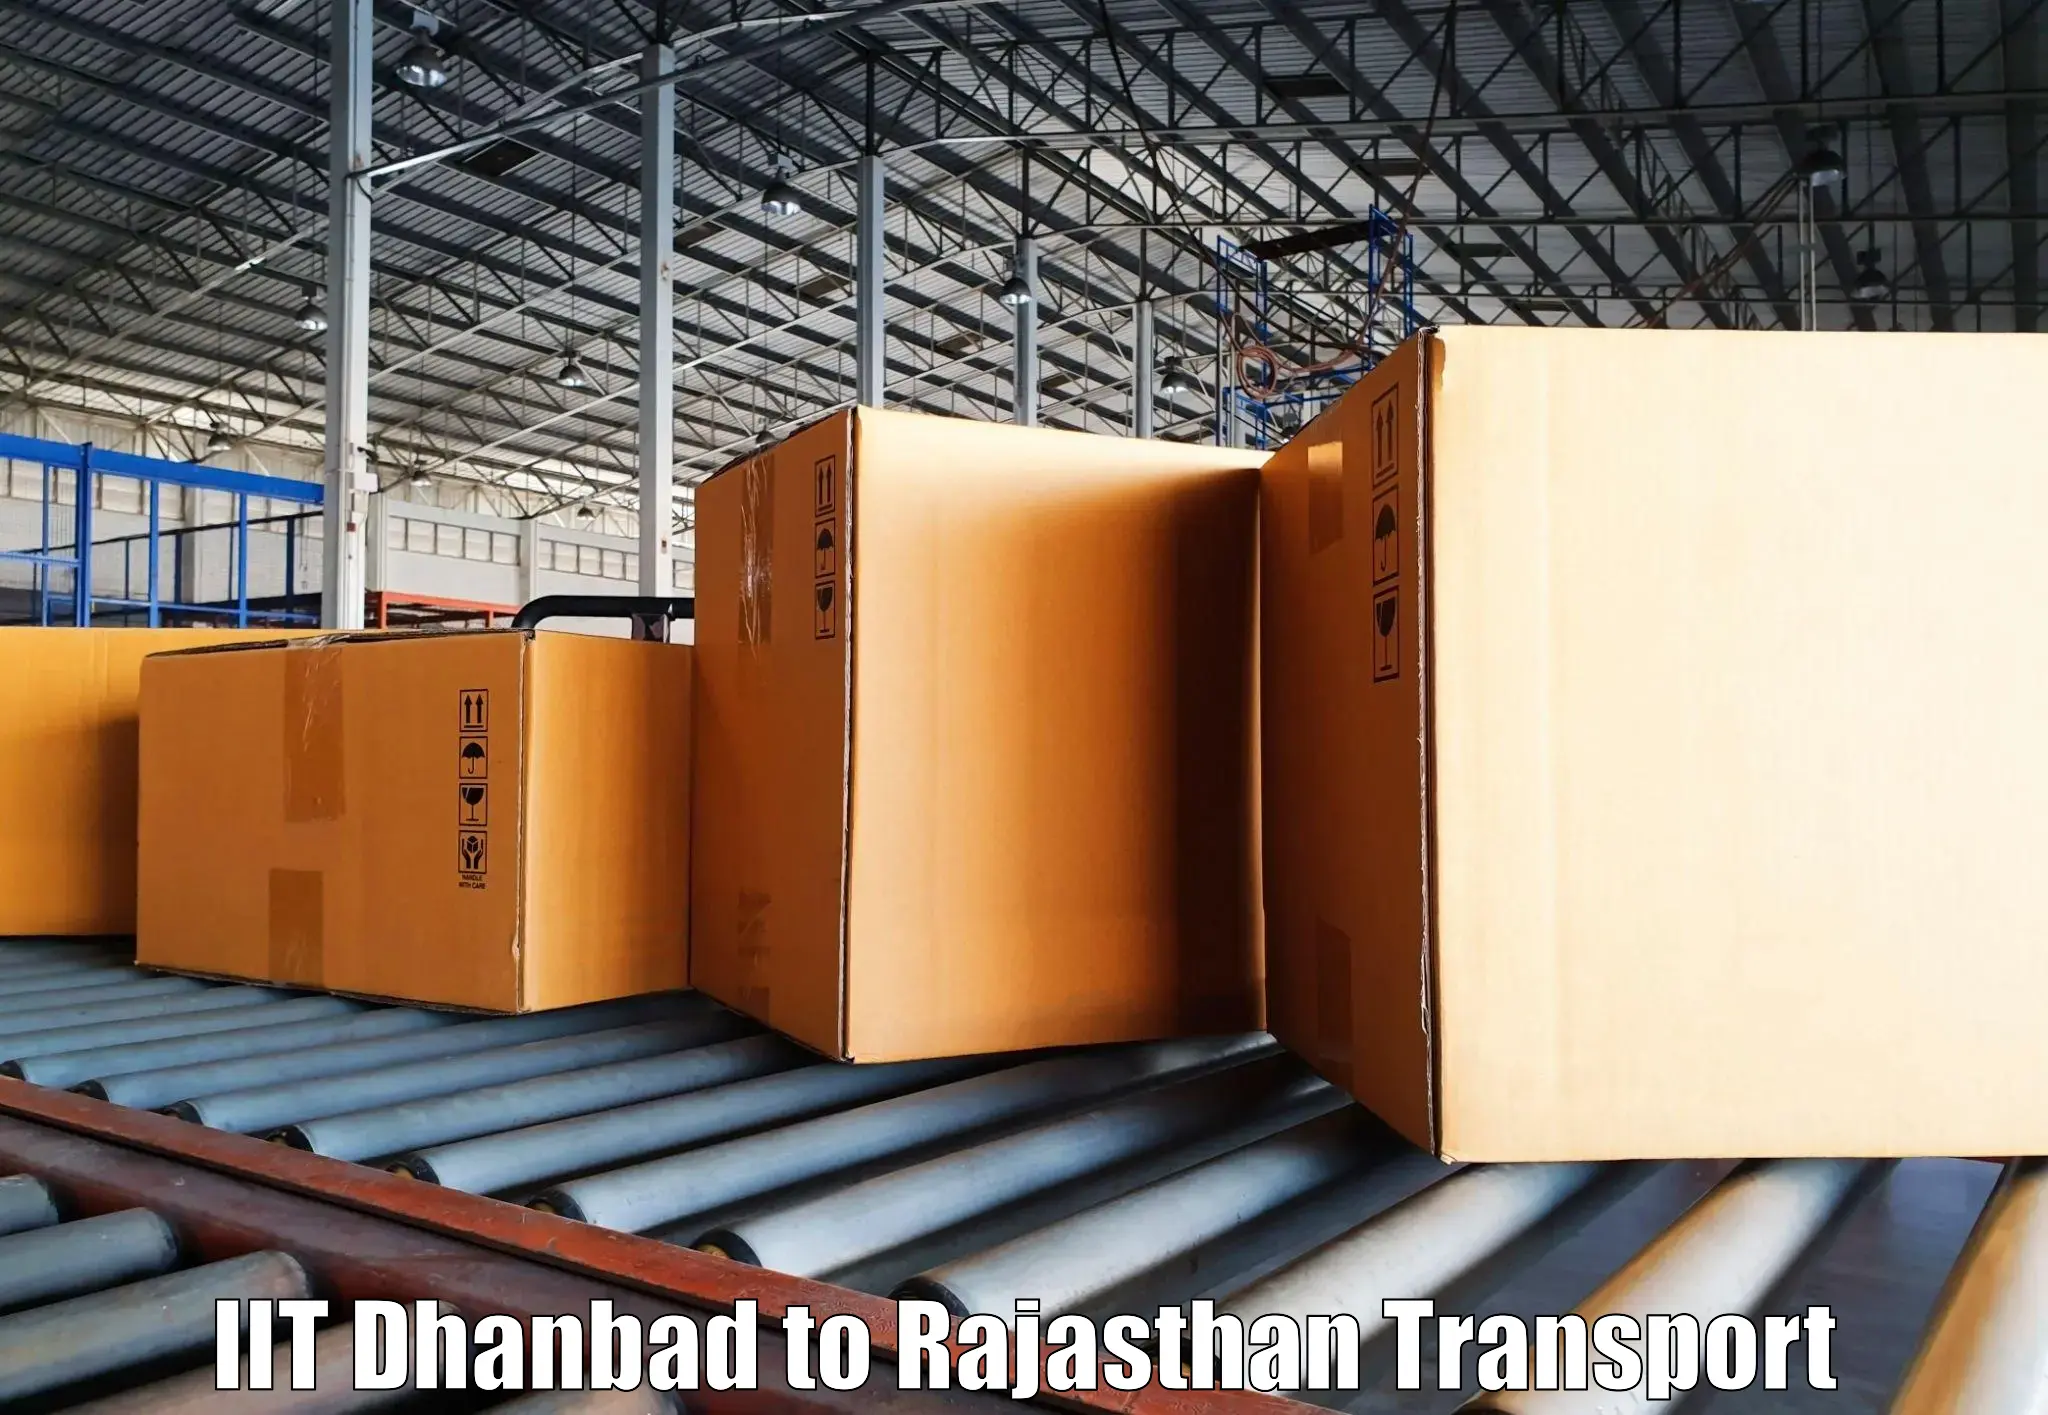 Daily parcel service transport IIT Dhanbad to Kishangarh